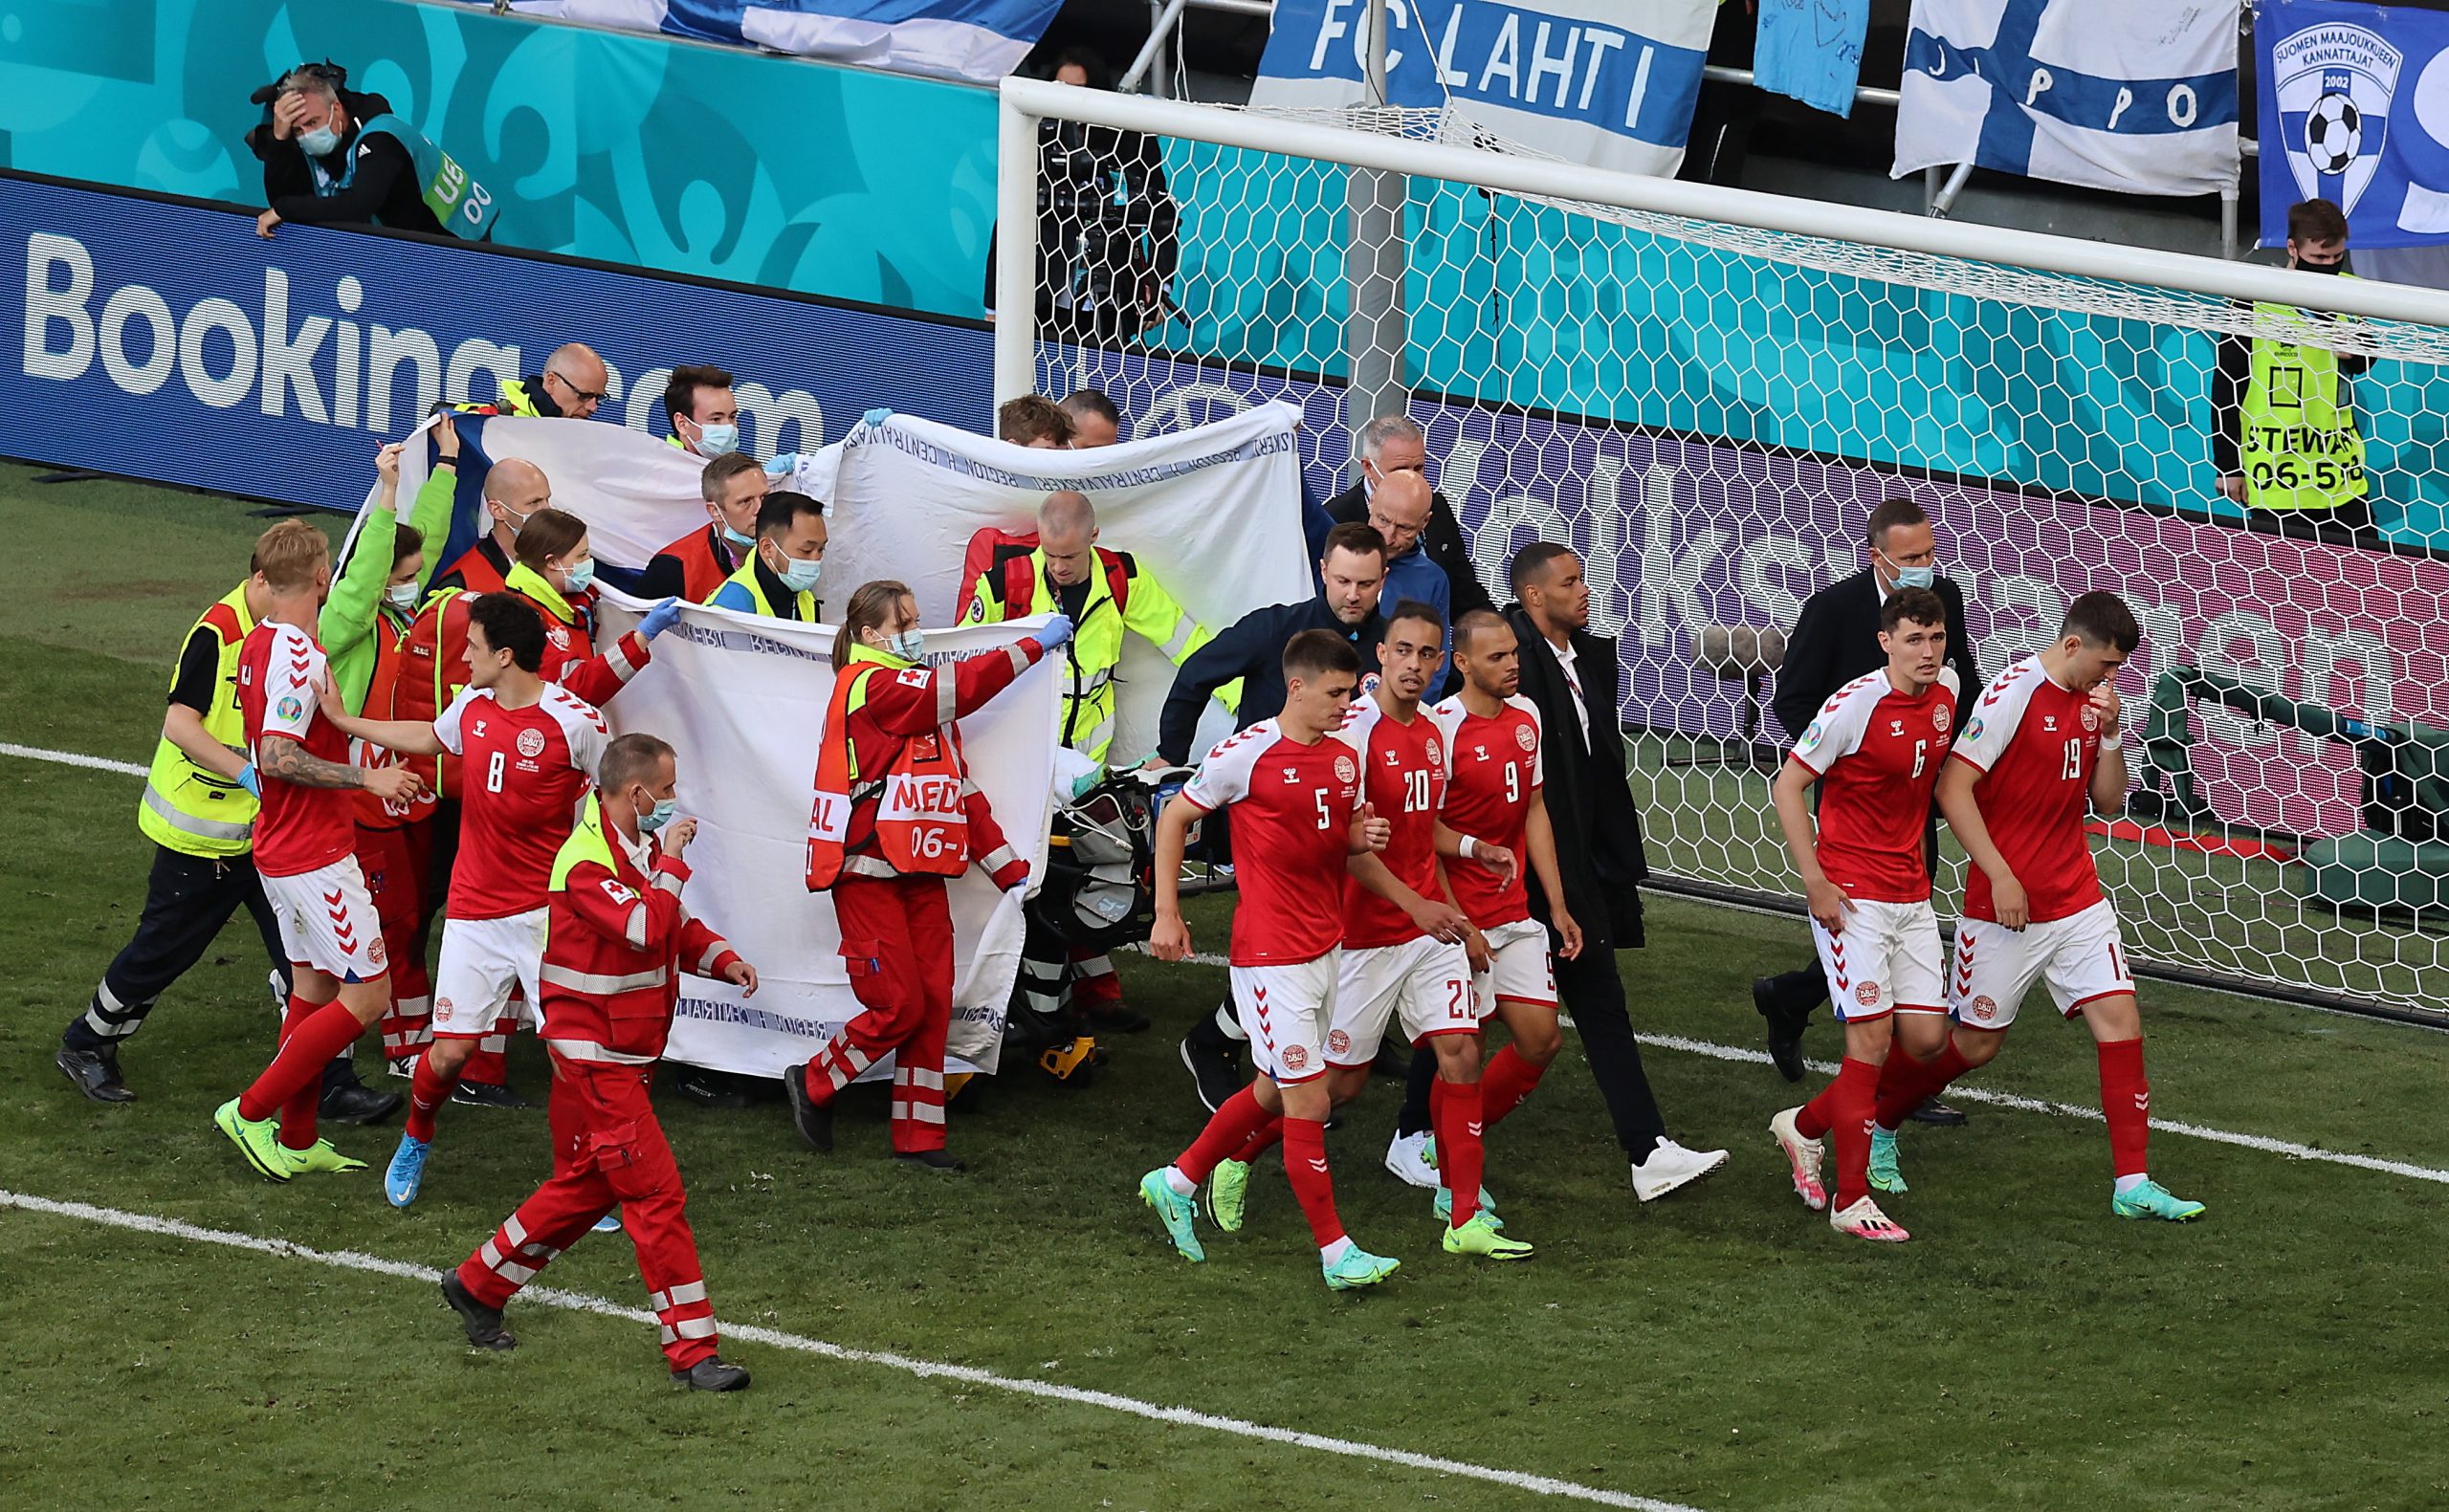 epa09265402 Christian Eriksen of Denmark receives medical attention during the UEFA EURO 2020 group B preliminary round soccer match between Denmark and Finland in Copenhagen, Denmark, 12 June 2021.  EPA/Wolfgang Rattay / POOL (RESTRICTIONS: For editorial news reporting purposes only. Images must appear as still images and must not emulate match action video footage. Photographs published in online publications shall have an interval of at least 20 seconds between the posting.)